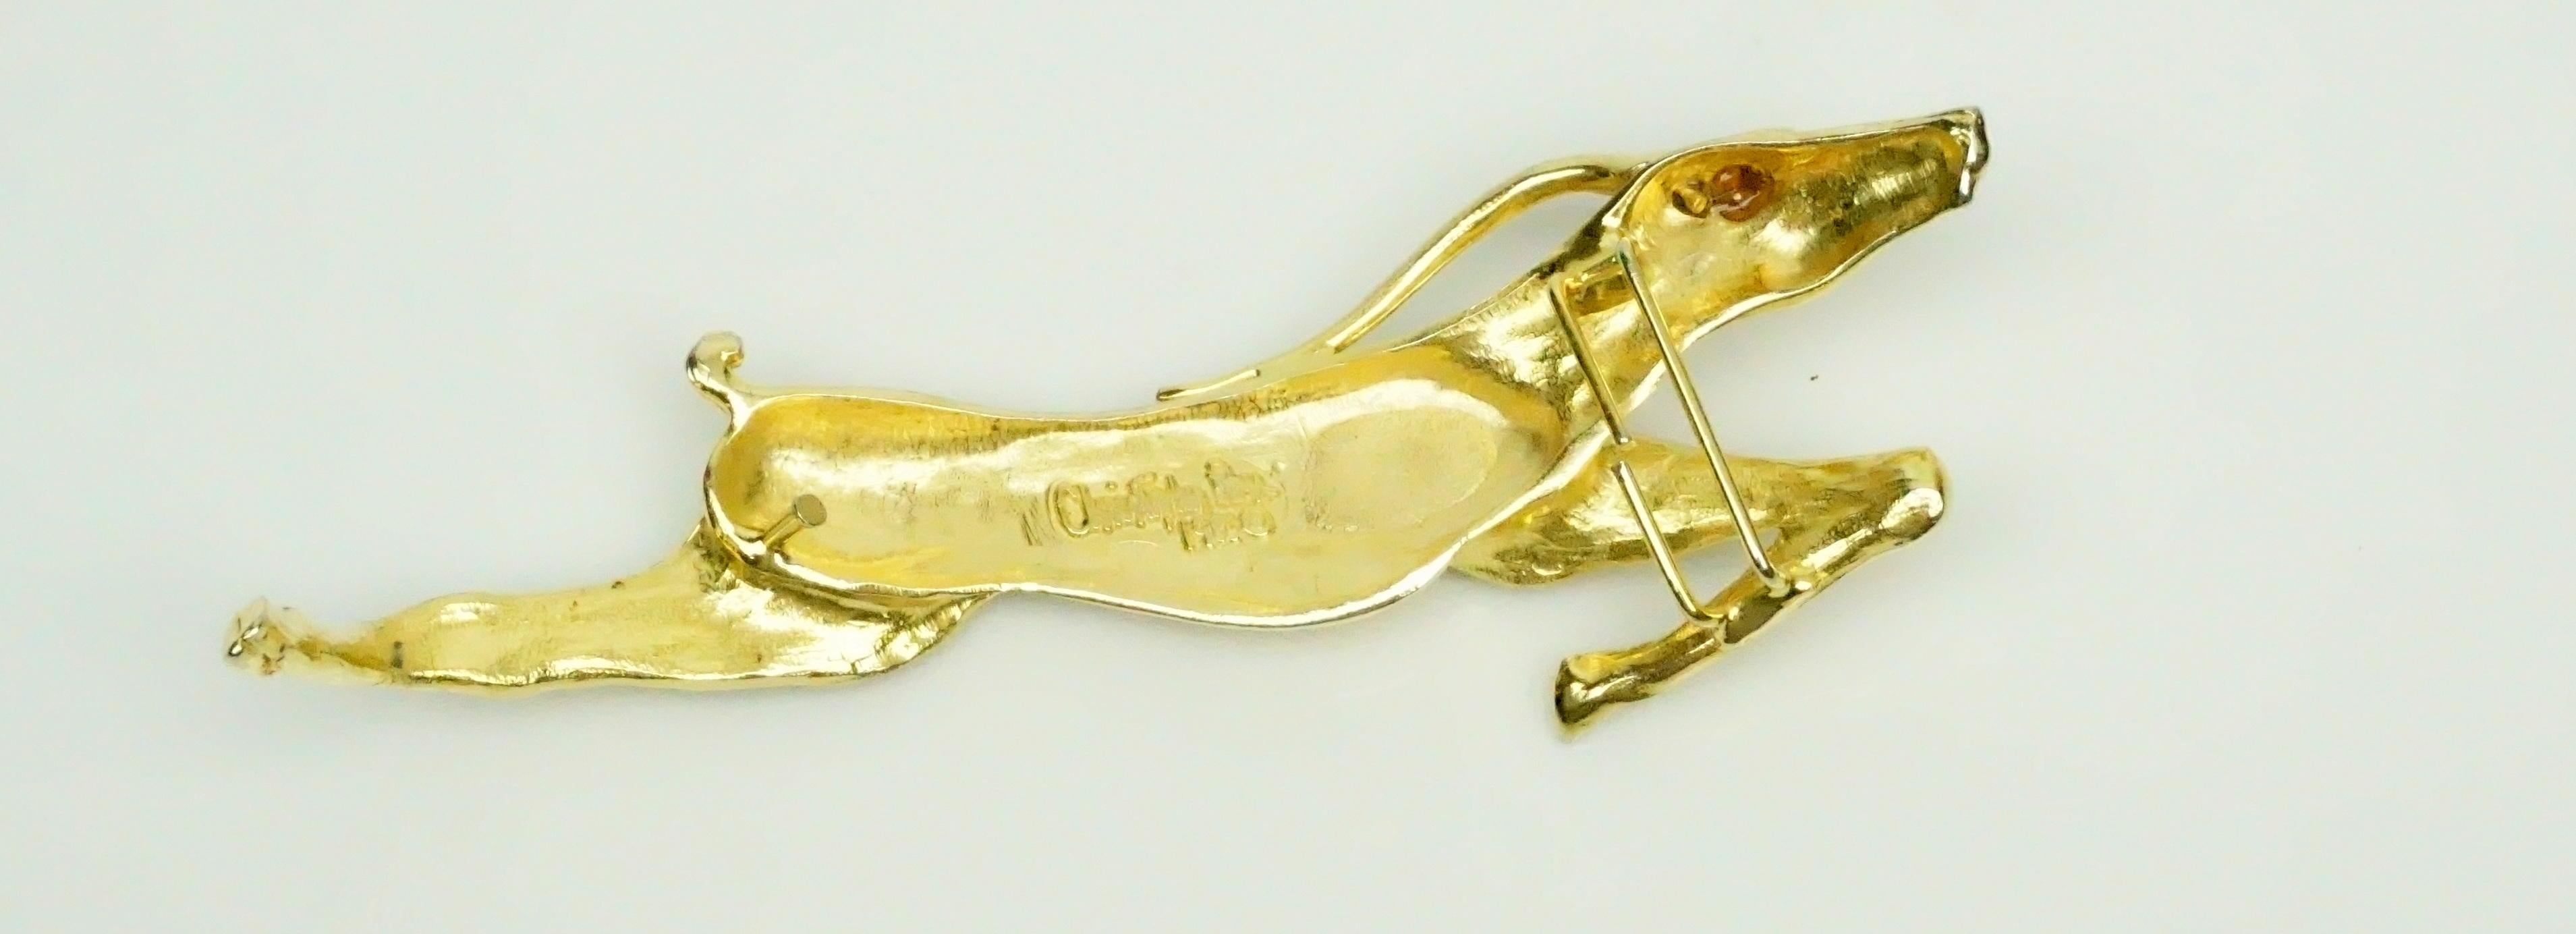 Christopher Ross Gold Deer Belt Buckle - Circa 1986  This collectible Buckle is in excellent vintage condition.
Measurements
Height: 2